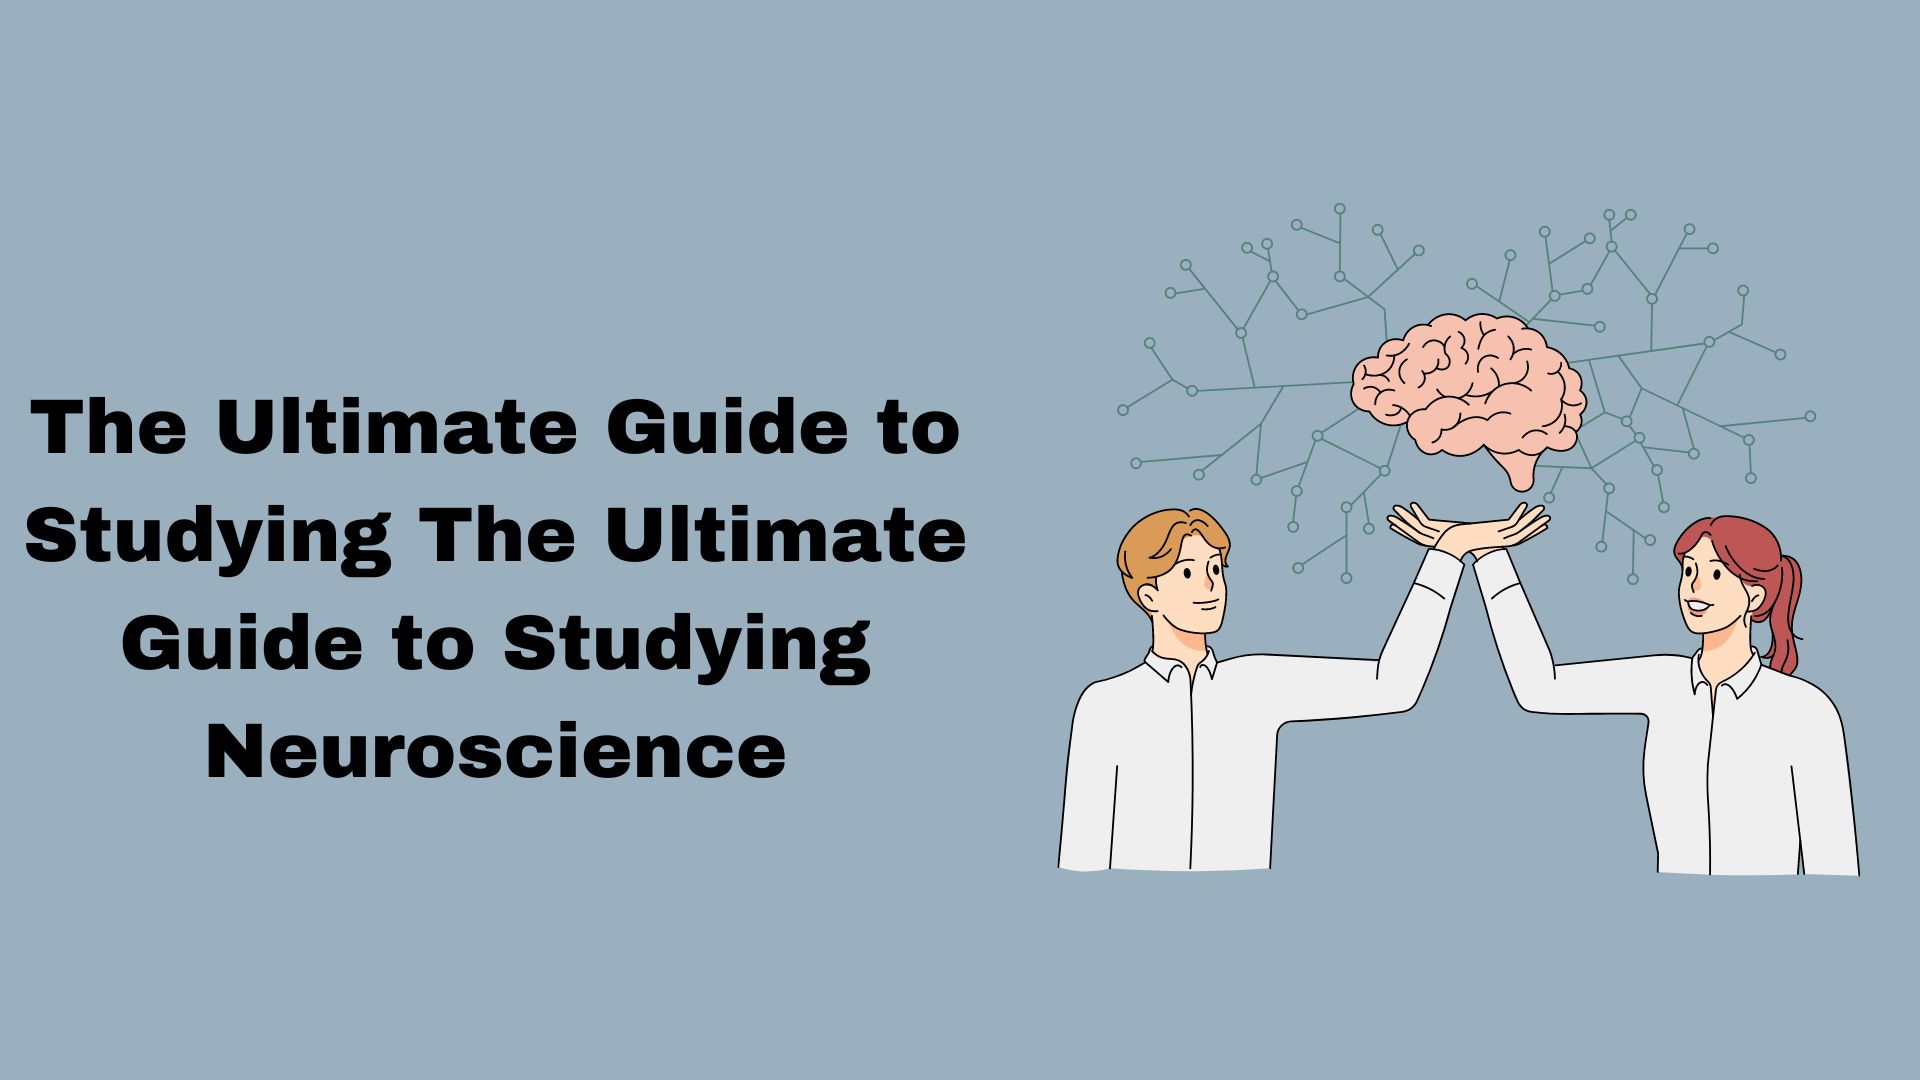 The Ultimate Guide to Studying Neuroscience